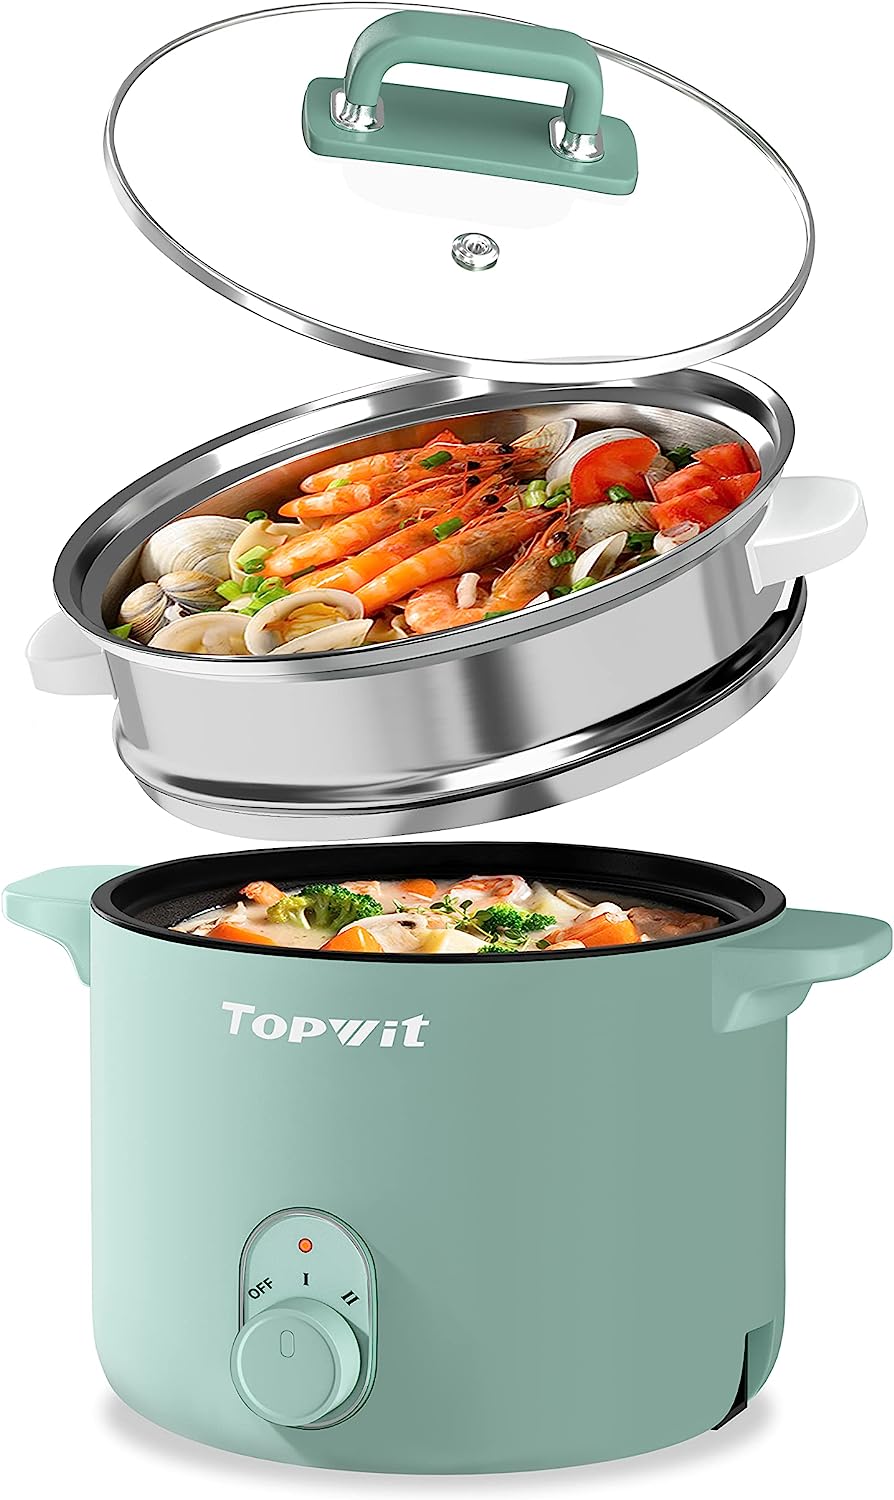 First-Class Electric Pot, 1.5L Non-stick Ramen Cooker, Multi-Function Hot Pot Electric for Pasta, Noodles, Steak, Egg, Electric Cooker with Dual Power Control, Over-Heating and Boil Dry Protection, Dorm Room Essentials, Green